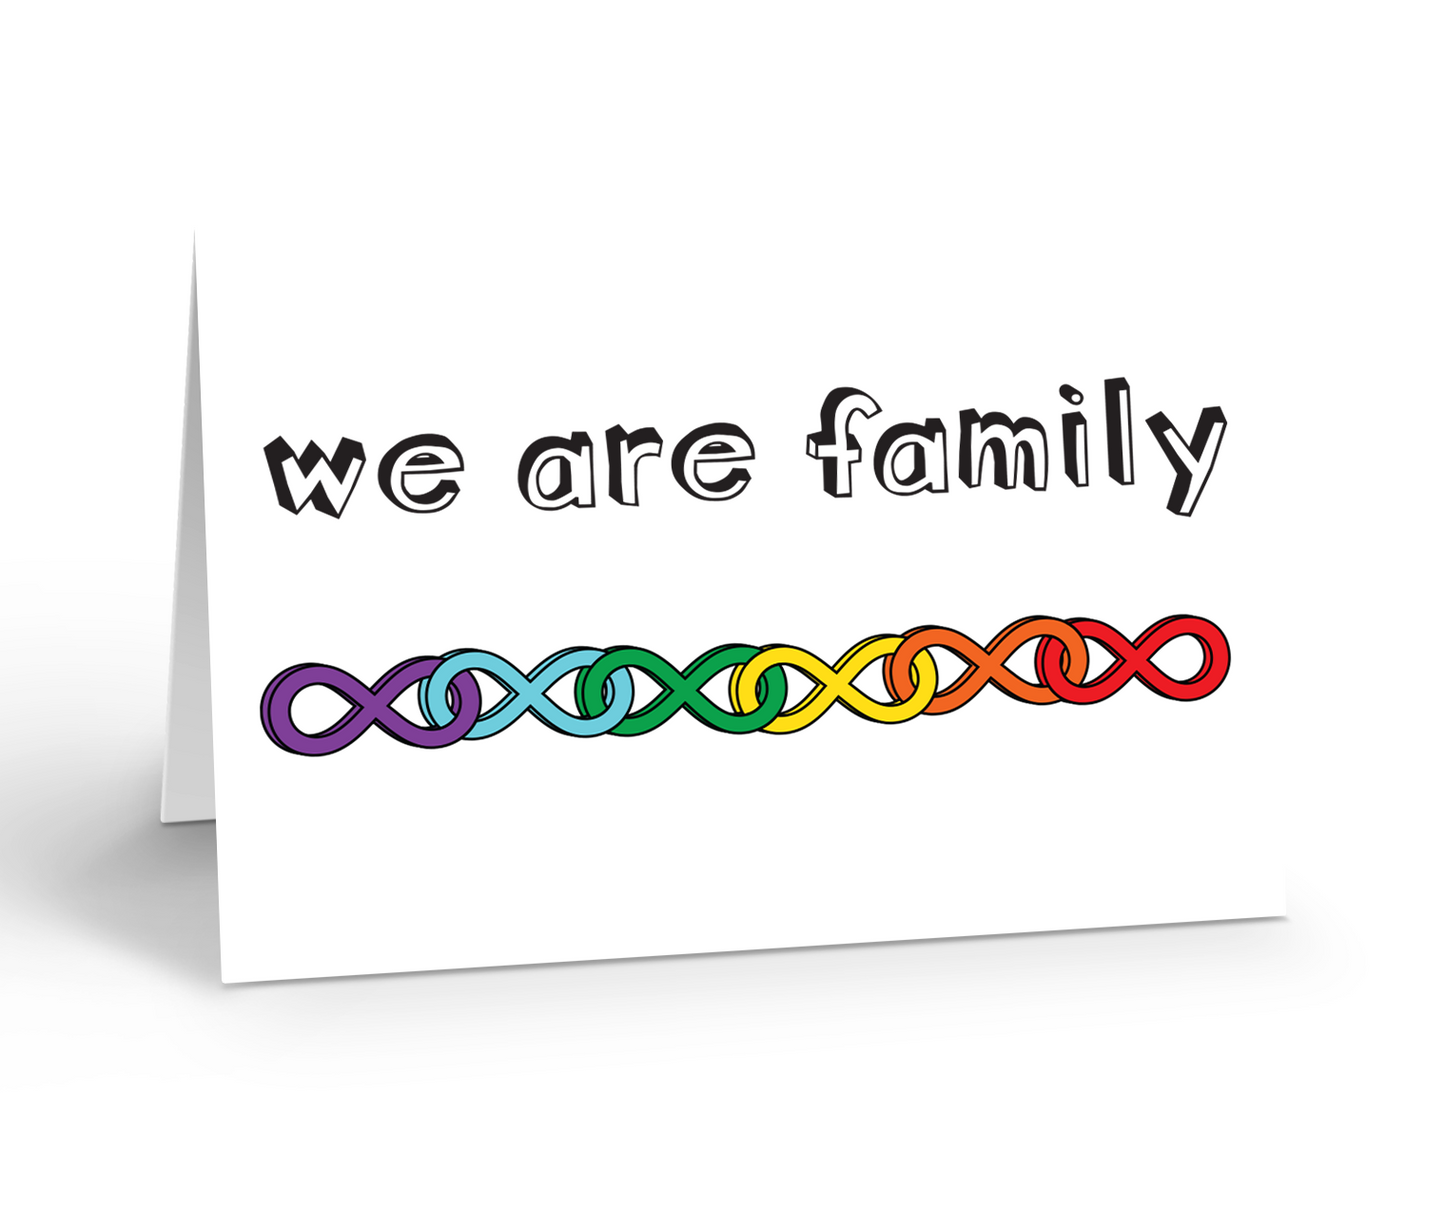 We are family greeting card featuring rainbow infinity symbols connected